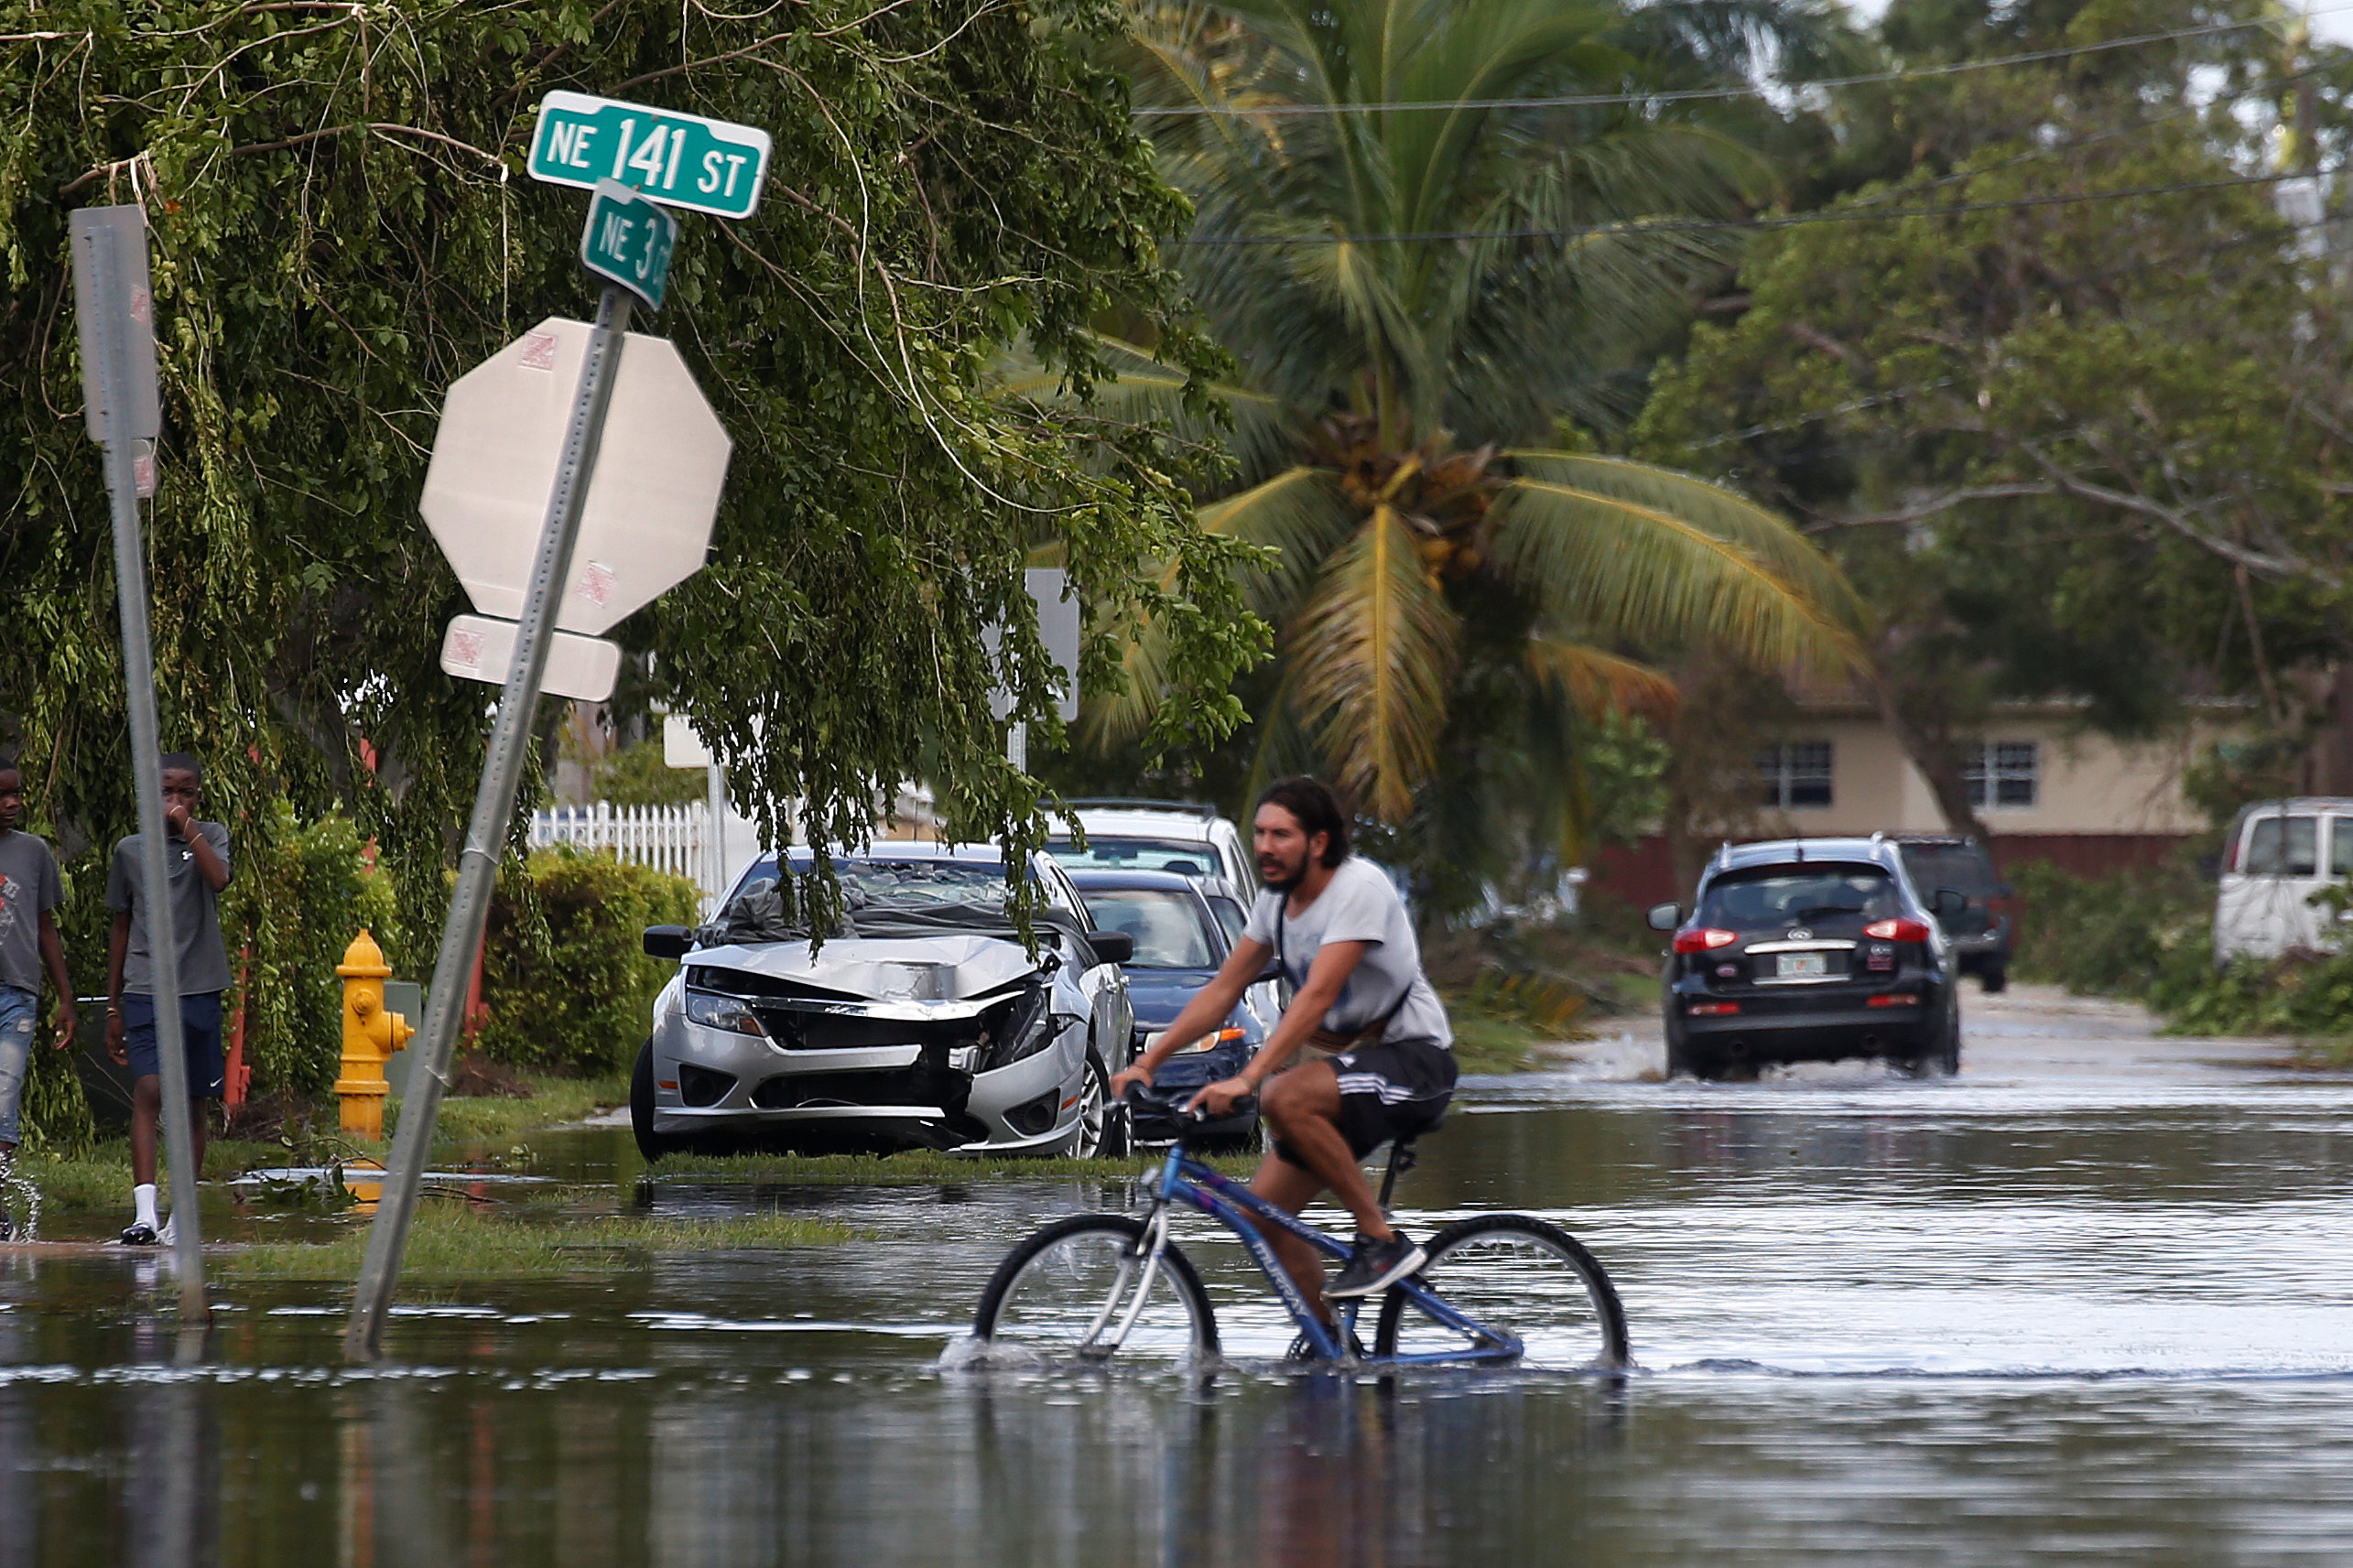 PHOTO: A man rides a bike on a flooded street following Hurricane Irma in North Miami, Sept. 11, 2017.